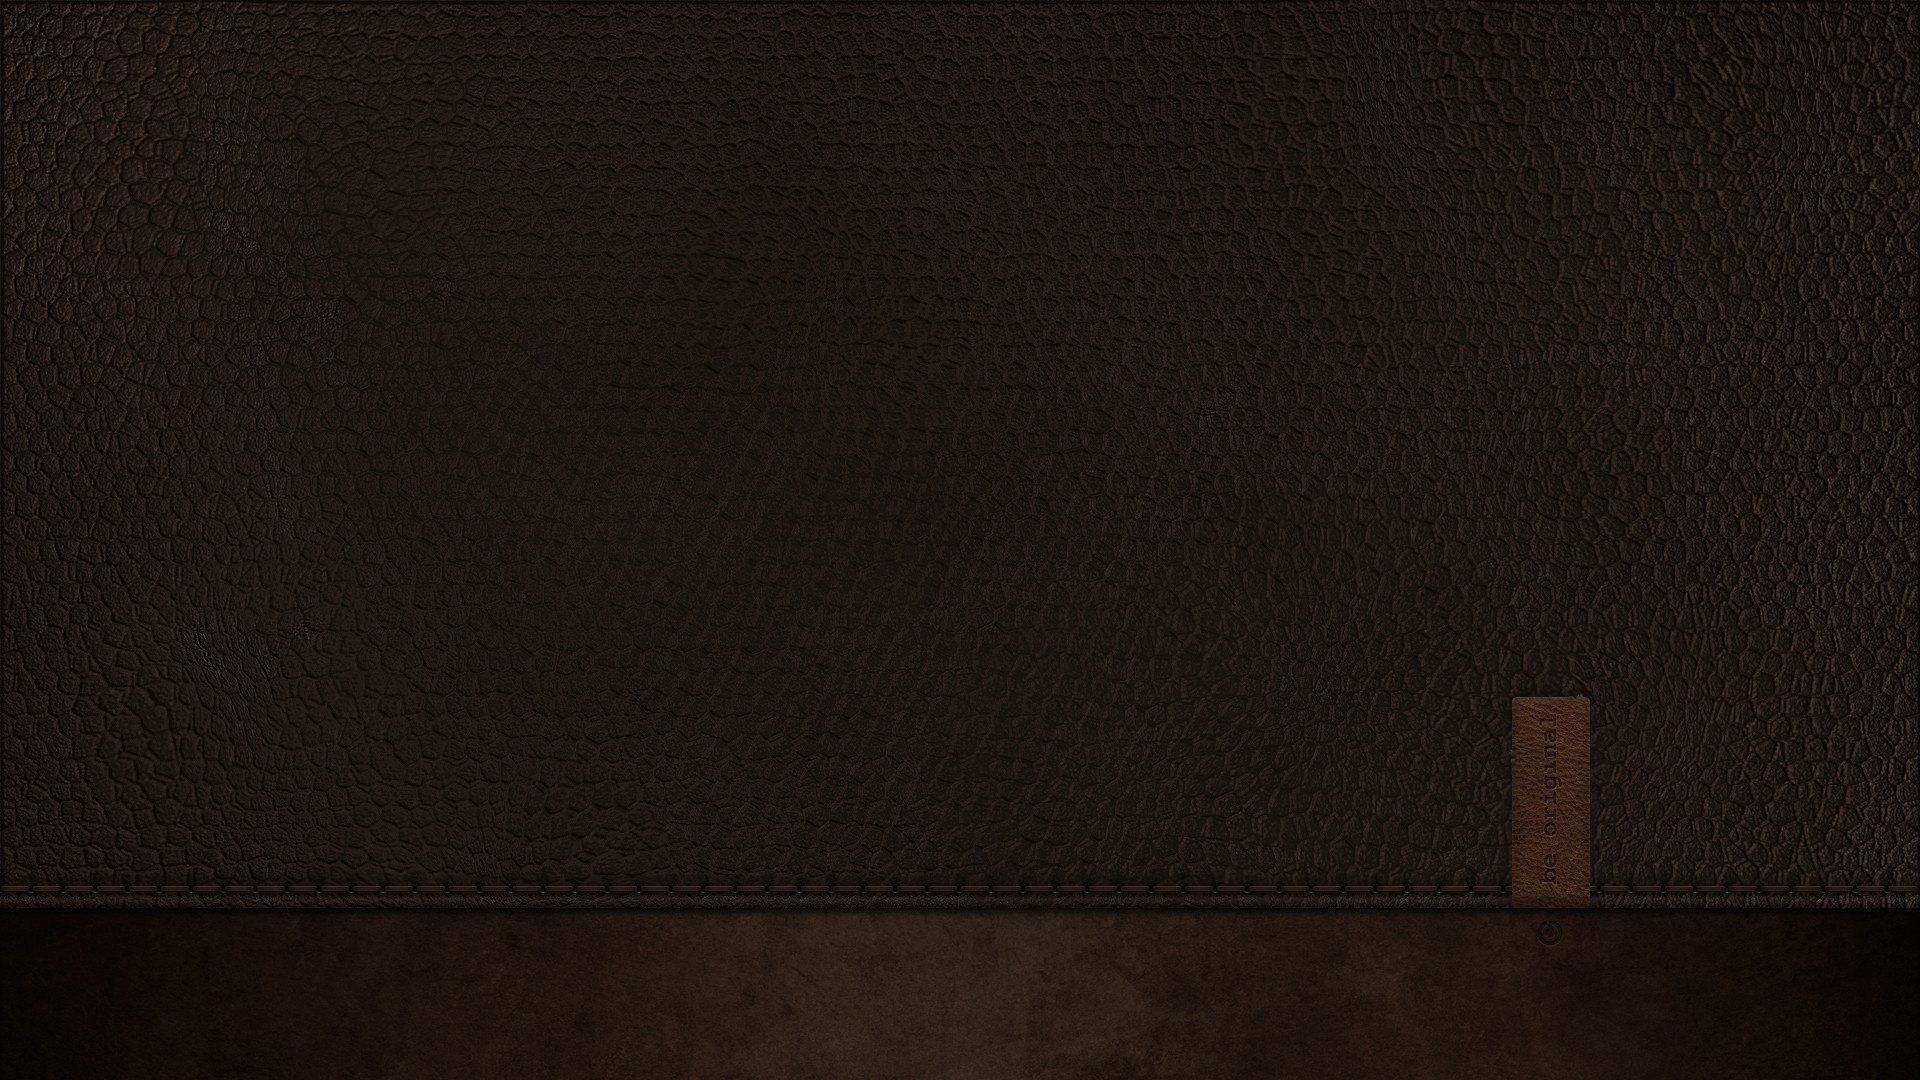 Leather Computer Wallpaper, HD Leather Computer Background on WallpaperBat